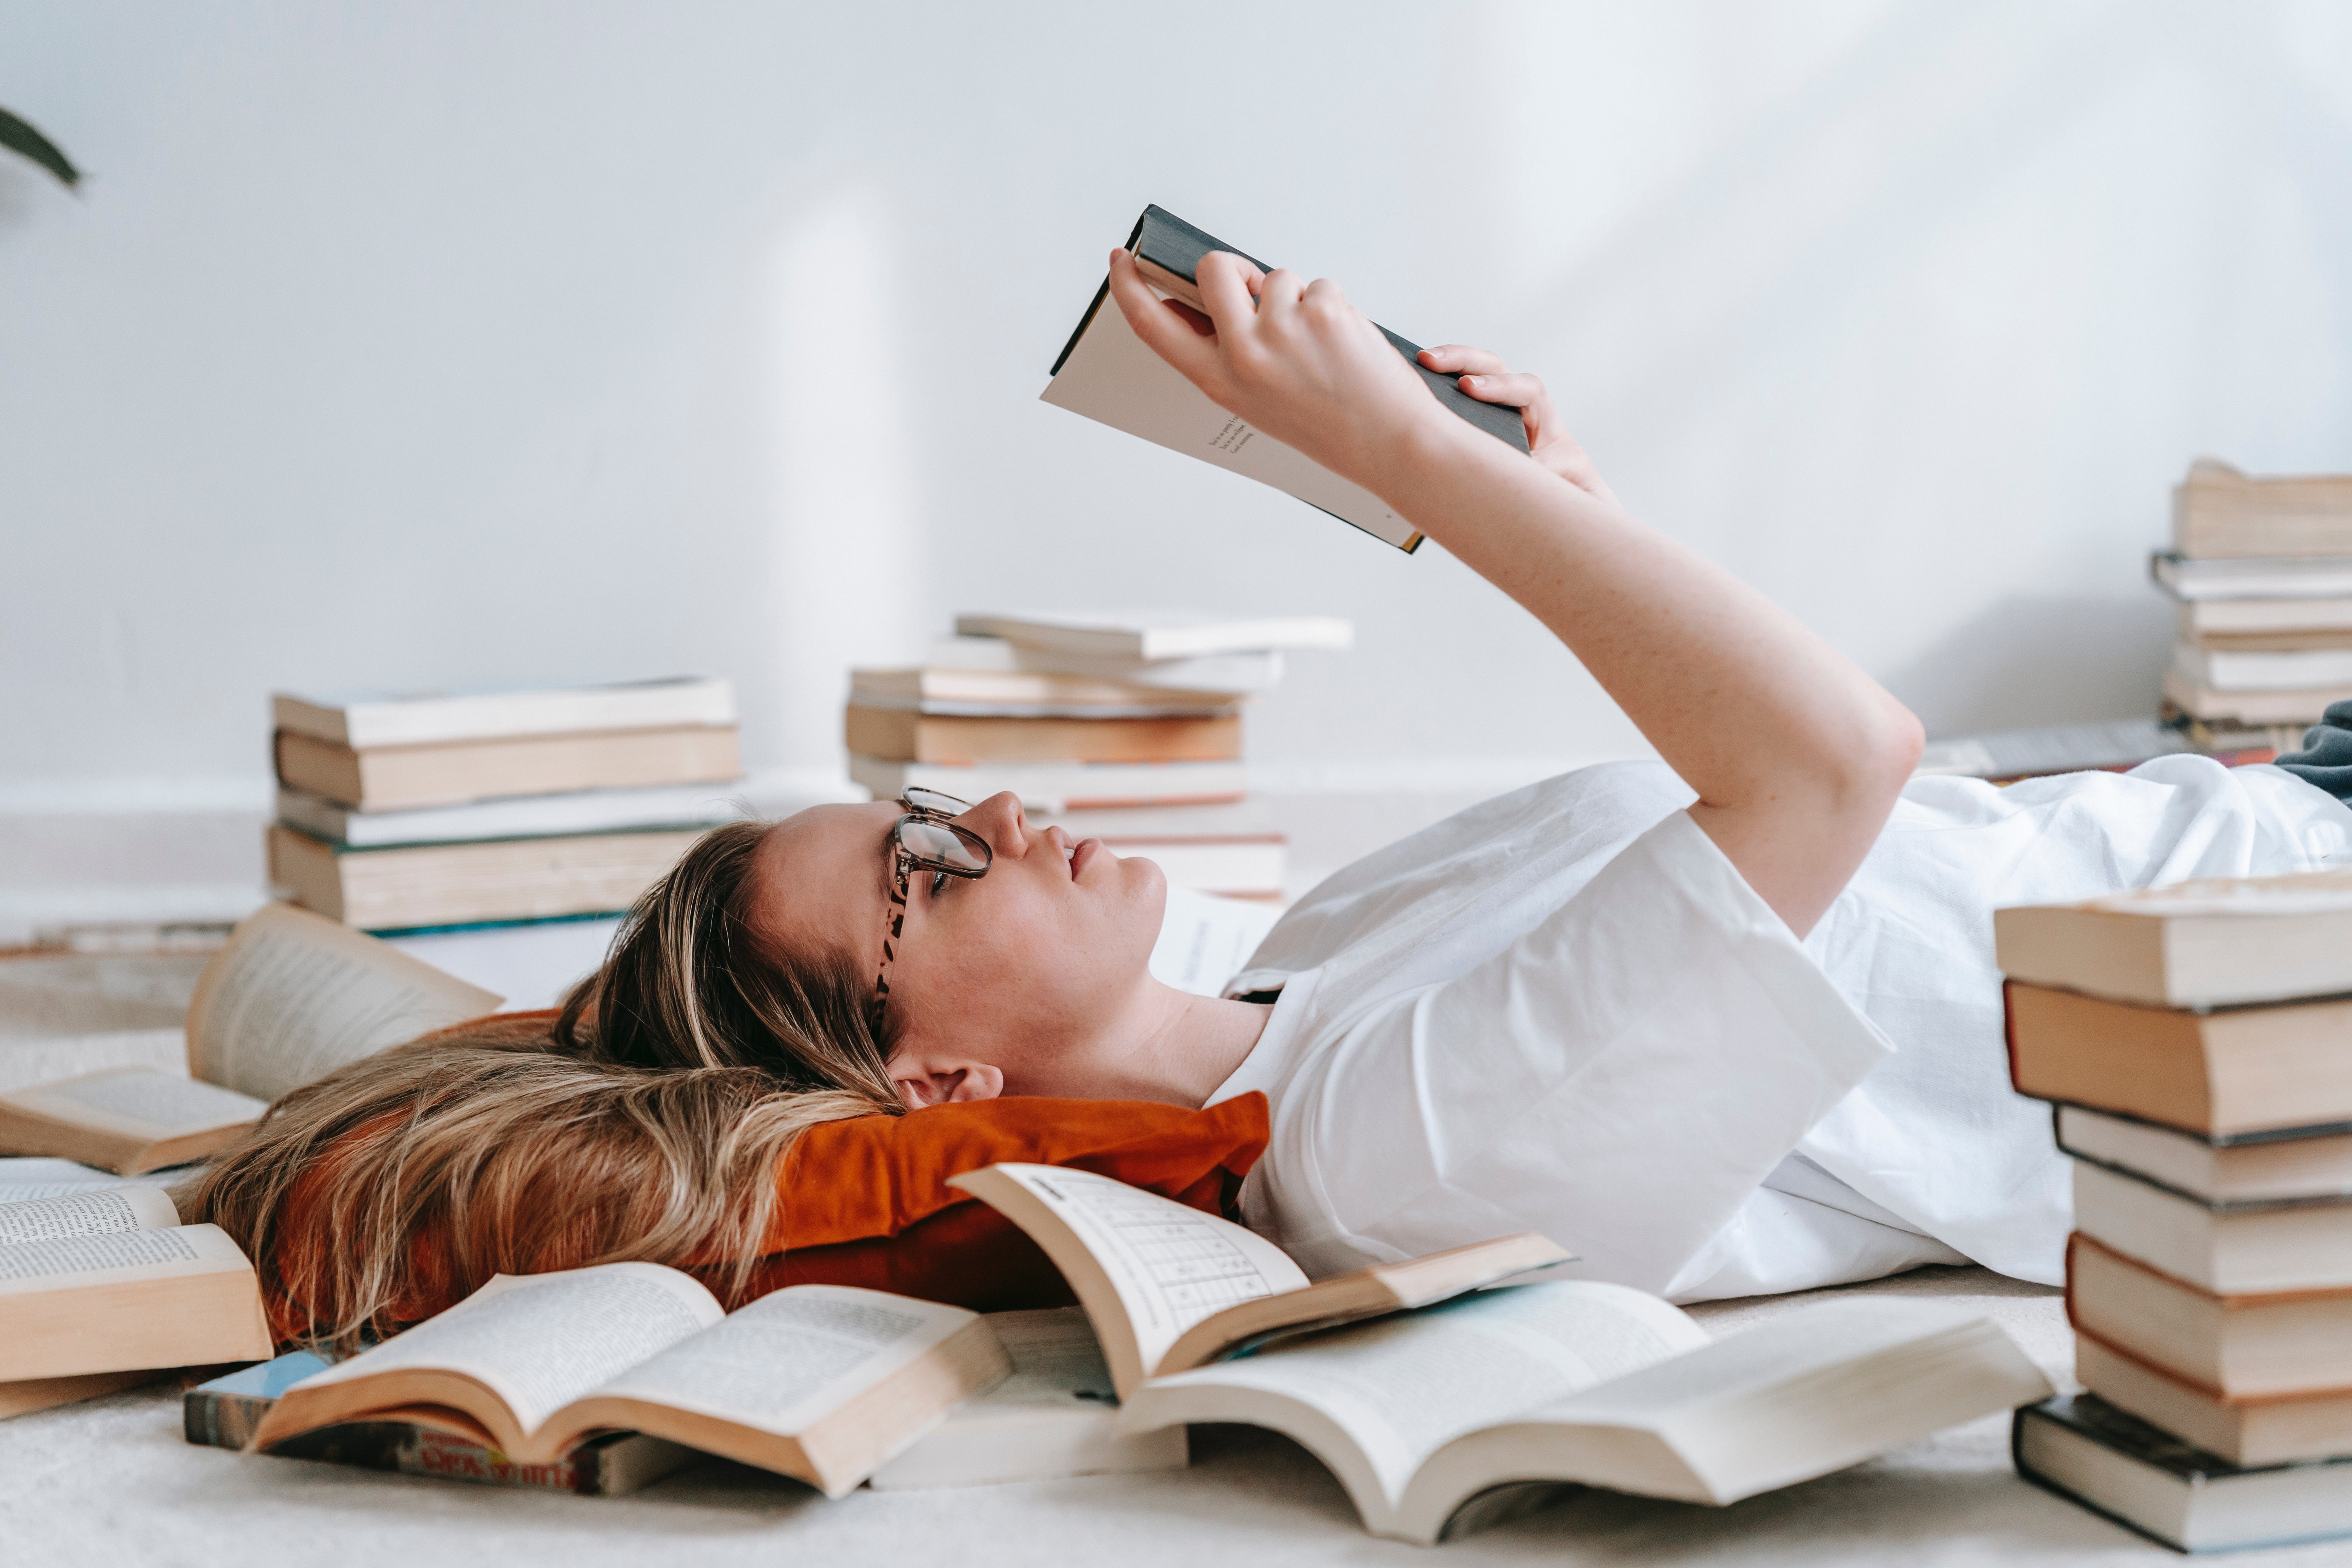 A woman surrounded by, and reading books | Source: Pexels